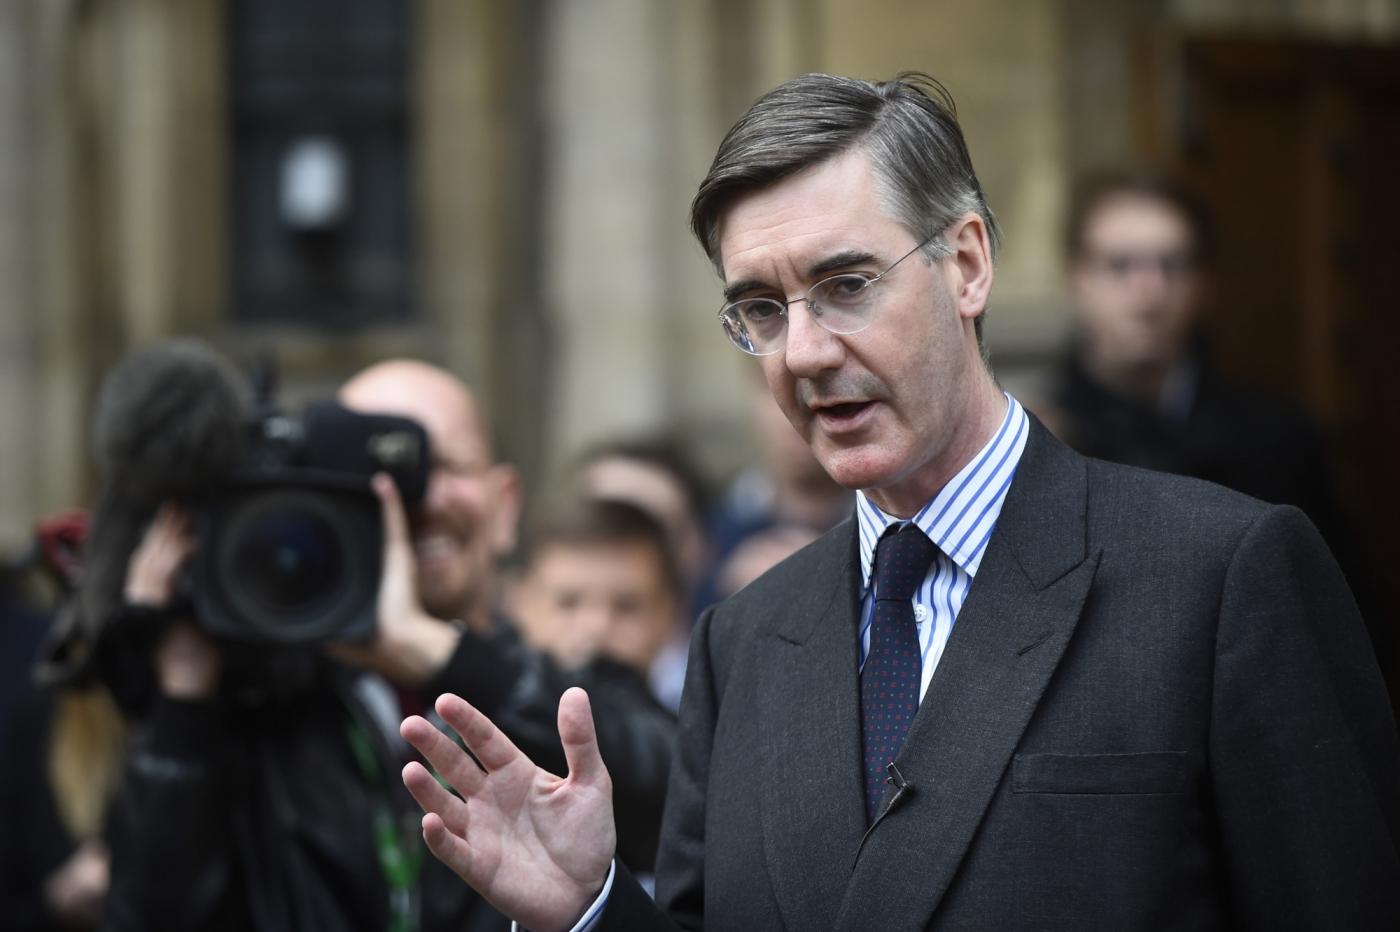 LONDON, Nov. 15, 2018 (Xinhua) -- Jacob Rees-Mogg, a member of the UK parliament and chairman of the European Research Group, speaks to the media outside the Houses of Parliament in London, Britain, on Nov. 15, 2018. Brexit-supporting Conservative MP Jacob Rees-Mogg sought a non-confidence vote over British Prime Minister Theresa May's draft agreement to leave the European Union (EU) in March 2019. (Xinhua/Stephen Chung/IANS) by . 